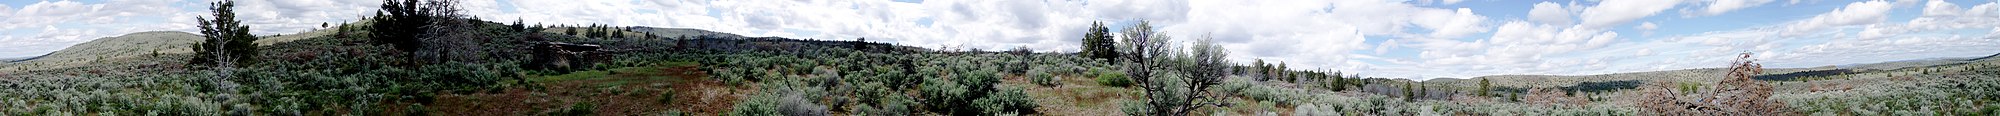 Panorama of the high desert in Central Oregon